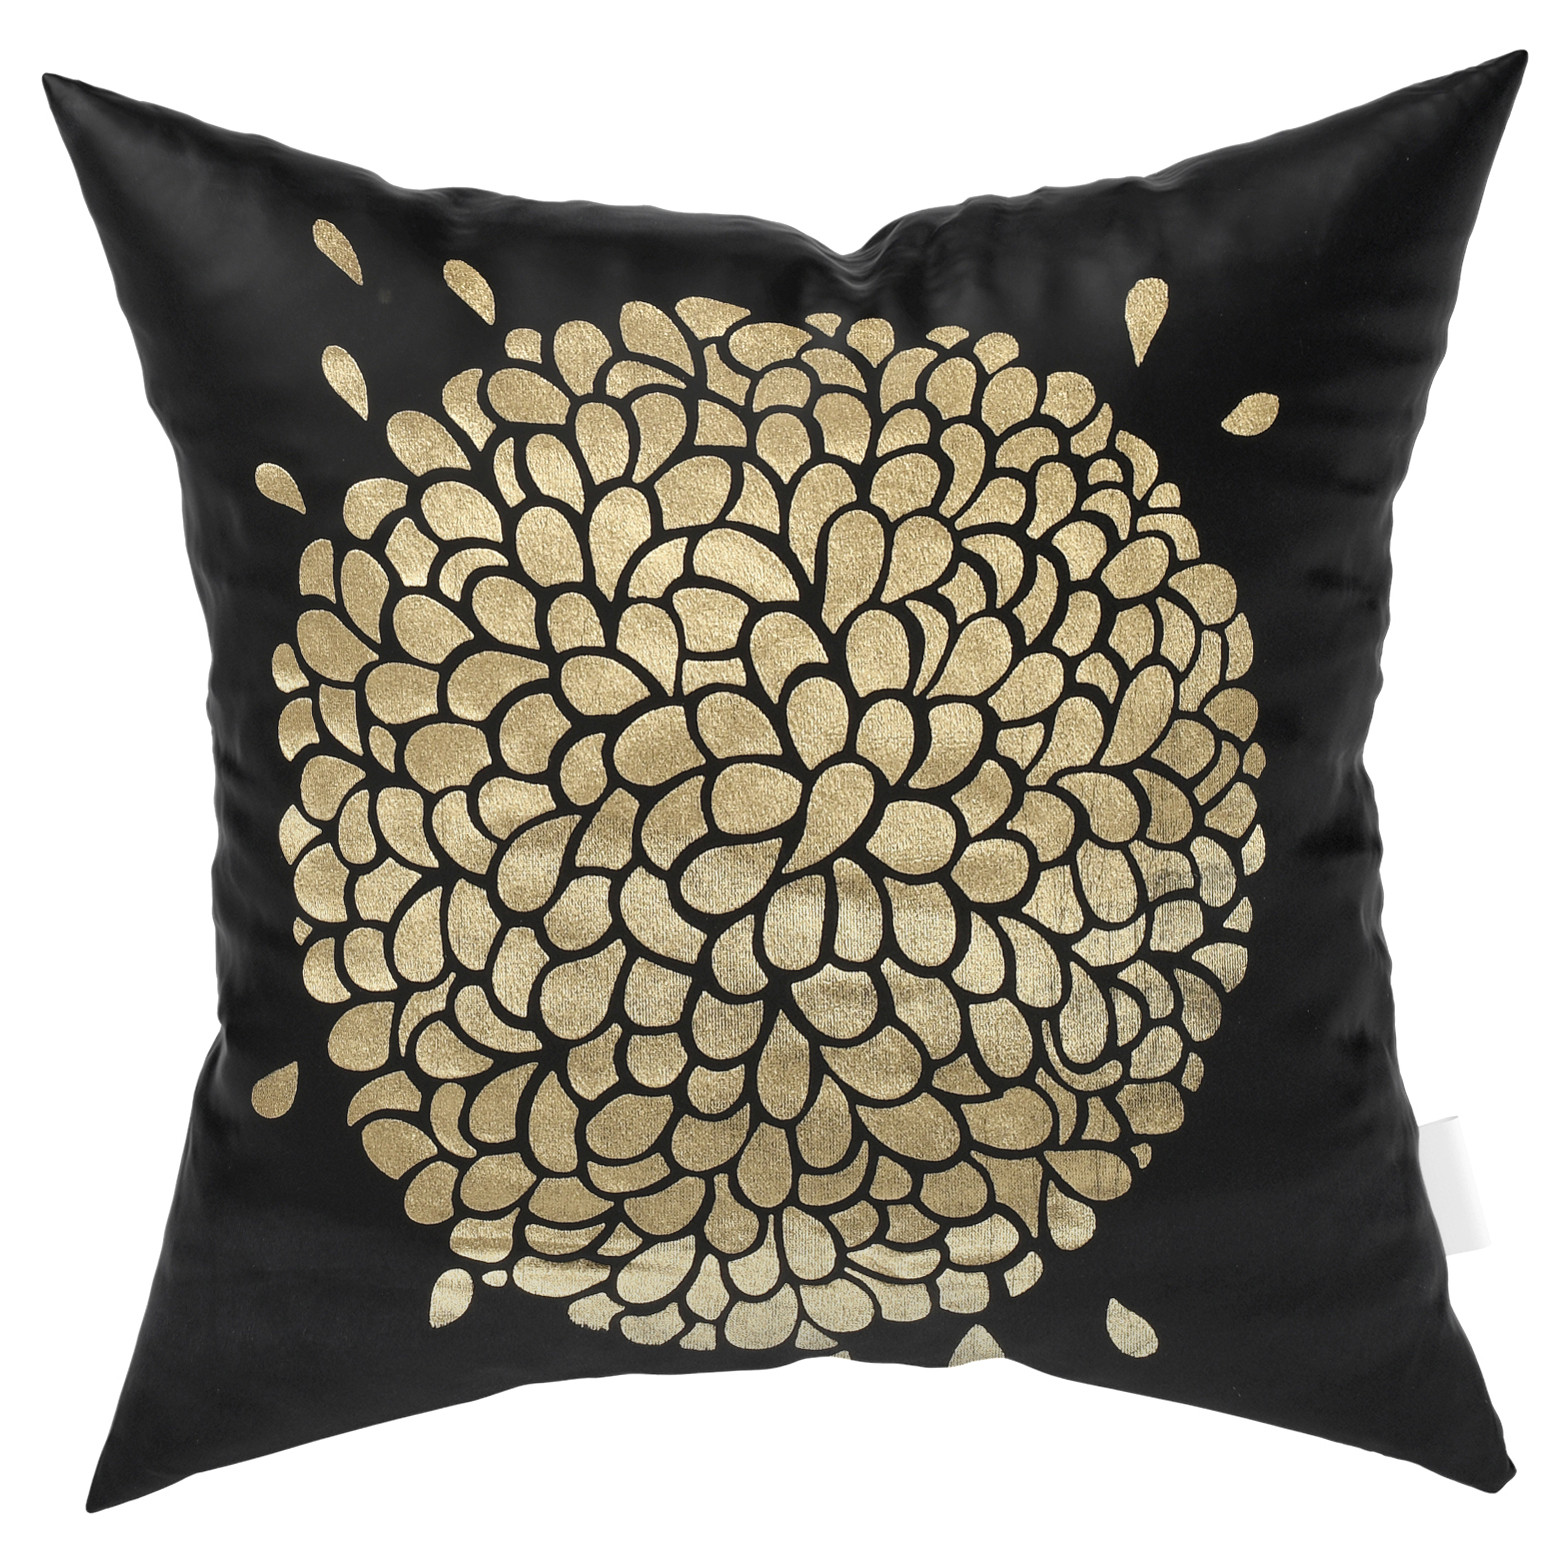 Kuber Industries Velvet Floral Design Soft Decorative Square Throw Pillow Cover, Cushion Covers, Pillow Case For Sofa Couch Bed Chair 16x16 Inch-(Black)